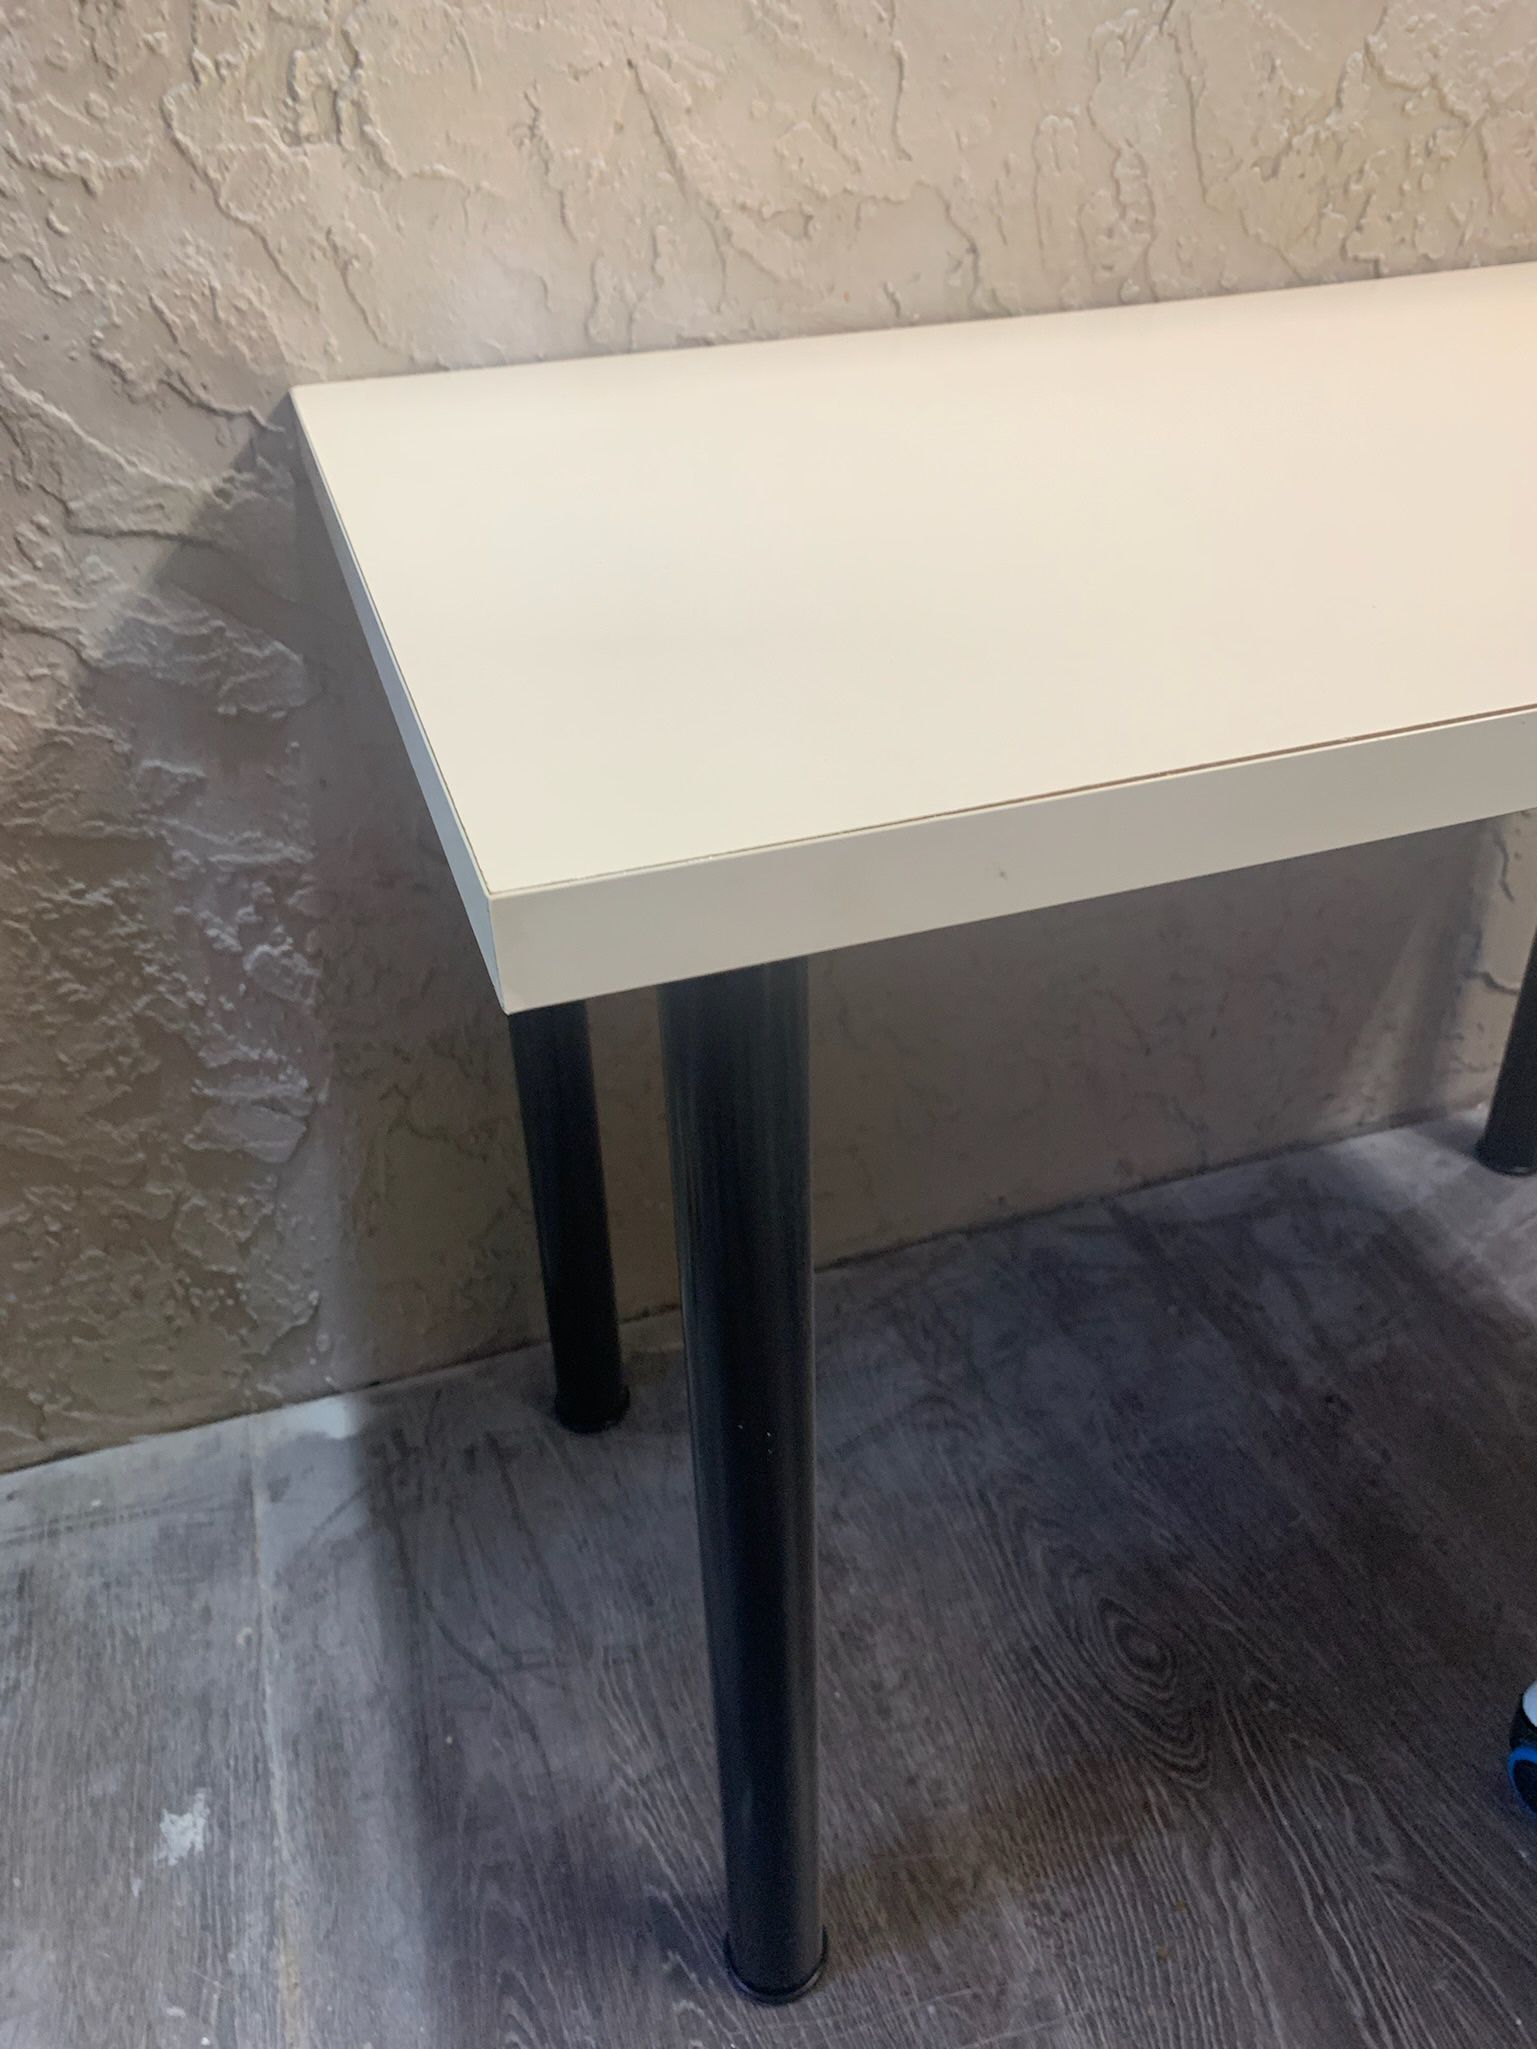 WHITE TABLE/DESK with Rolling Blue Chair